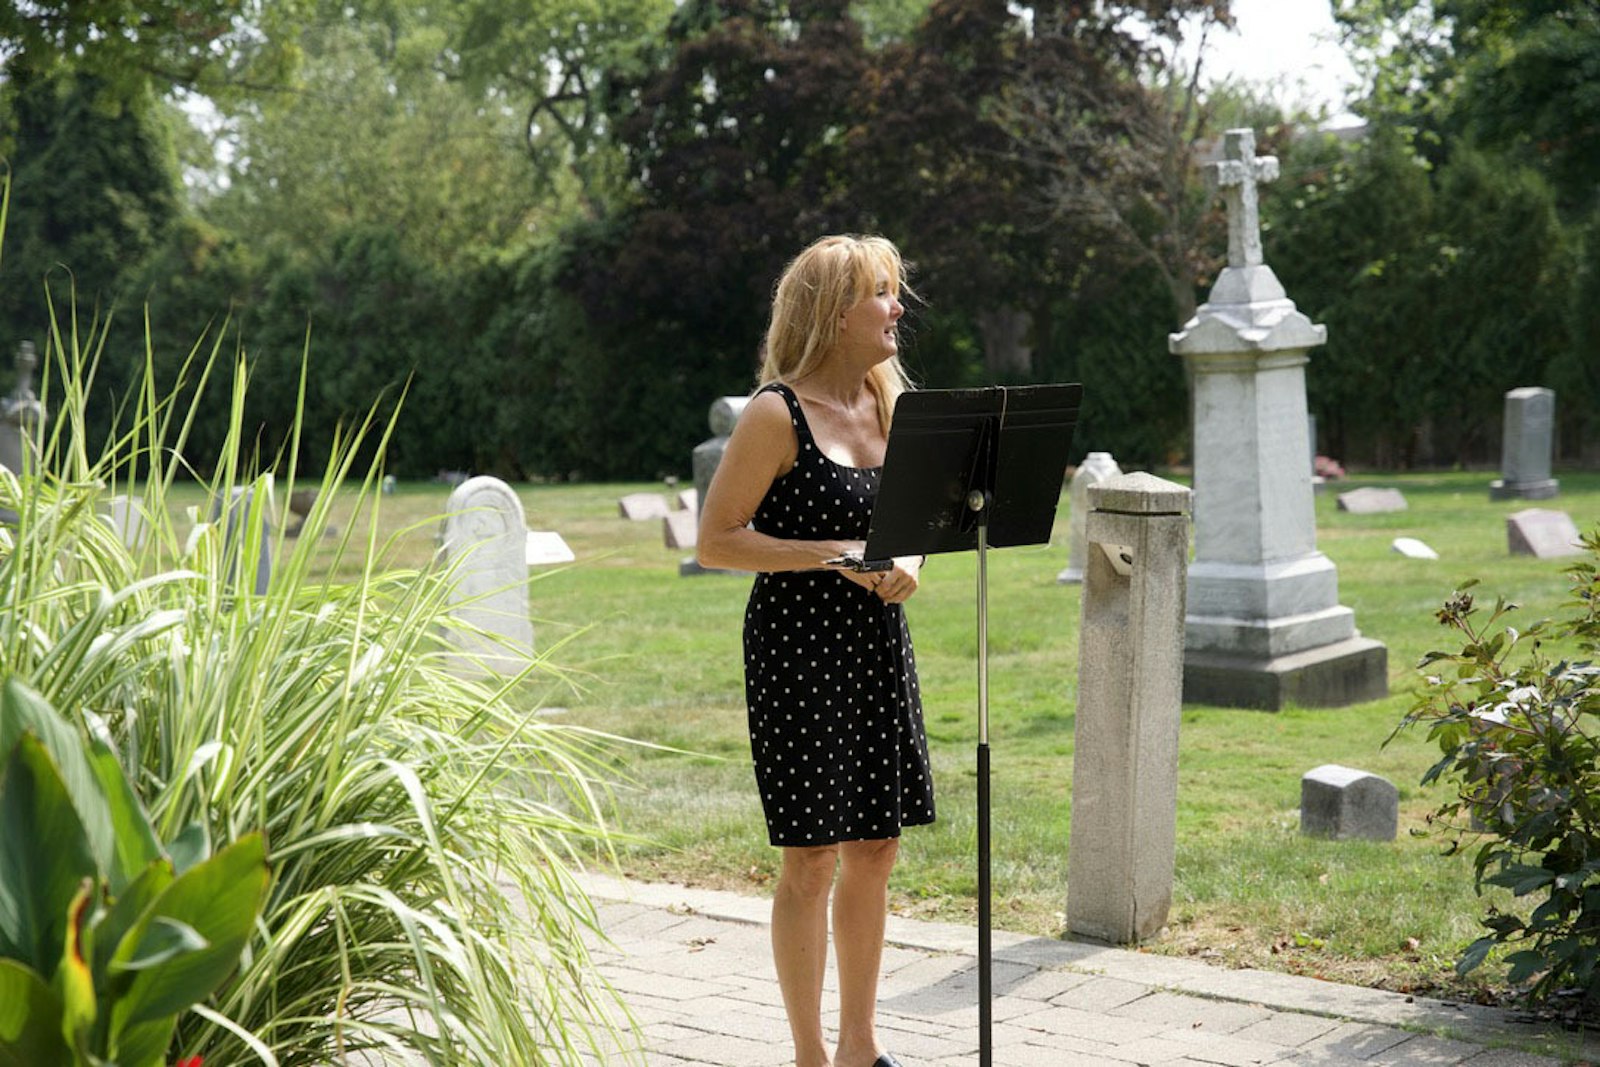 Pro-life activist and lawyer Rebecca Kiessling speaks during the prayer service Sept. 17 for victims of abortion at Assumption Grotto Cemetery. Kiessling, who was conceived in rape and nearly aborted herself, spoke about the pain of losing a child, relating her own experience as a mother of adopted children, two of whom died in 2020.